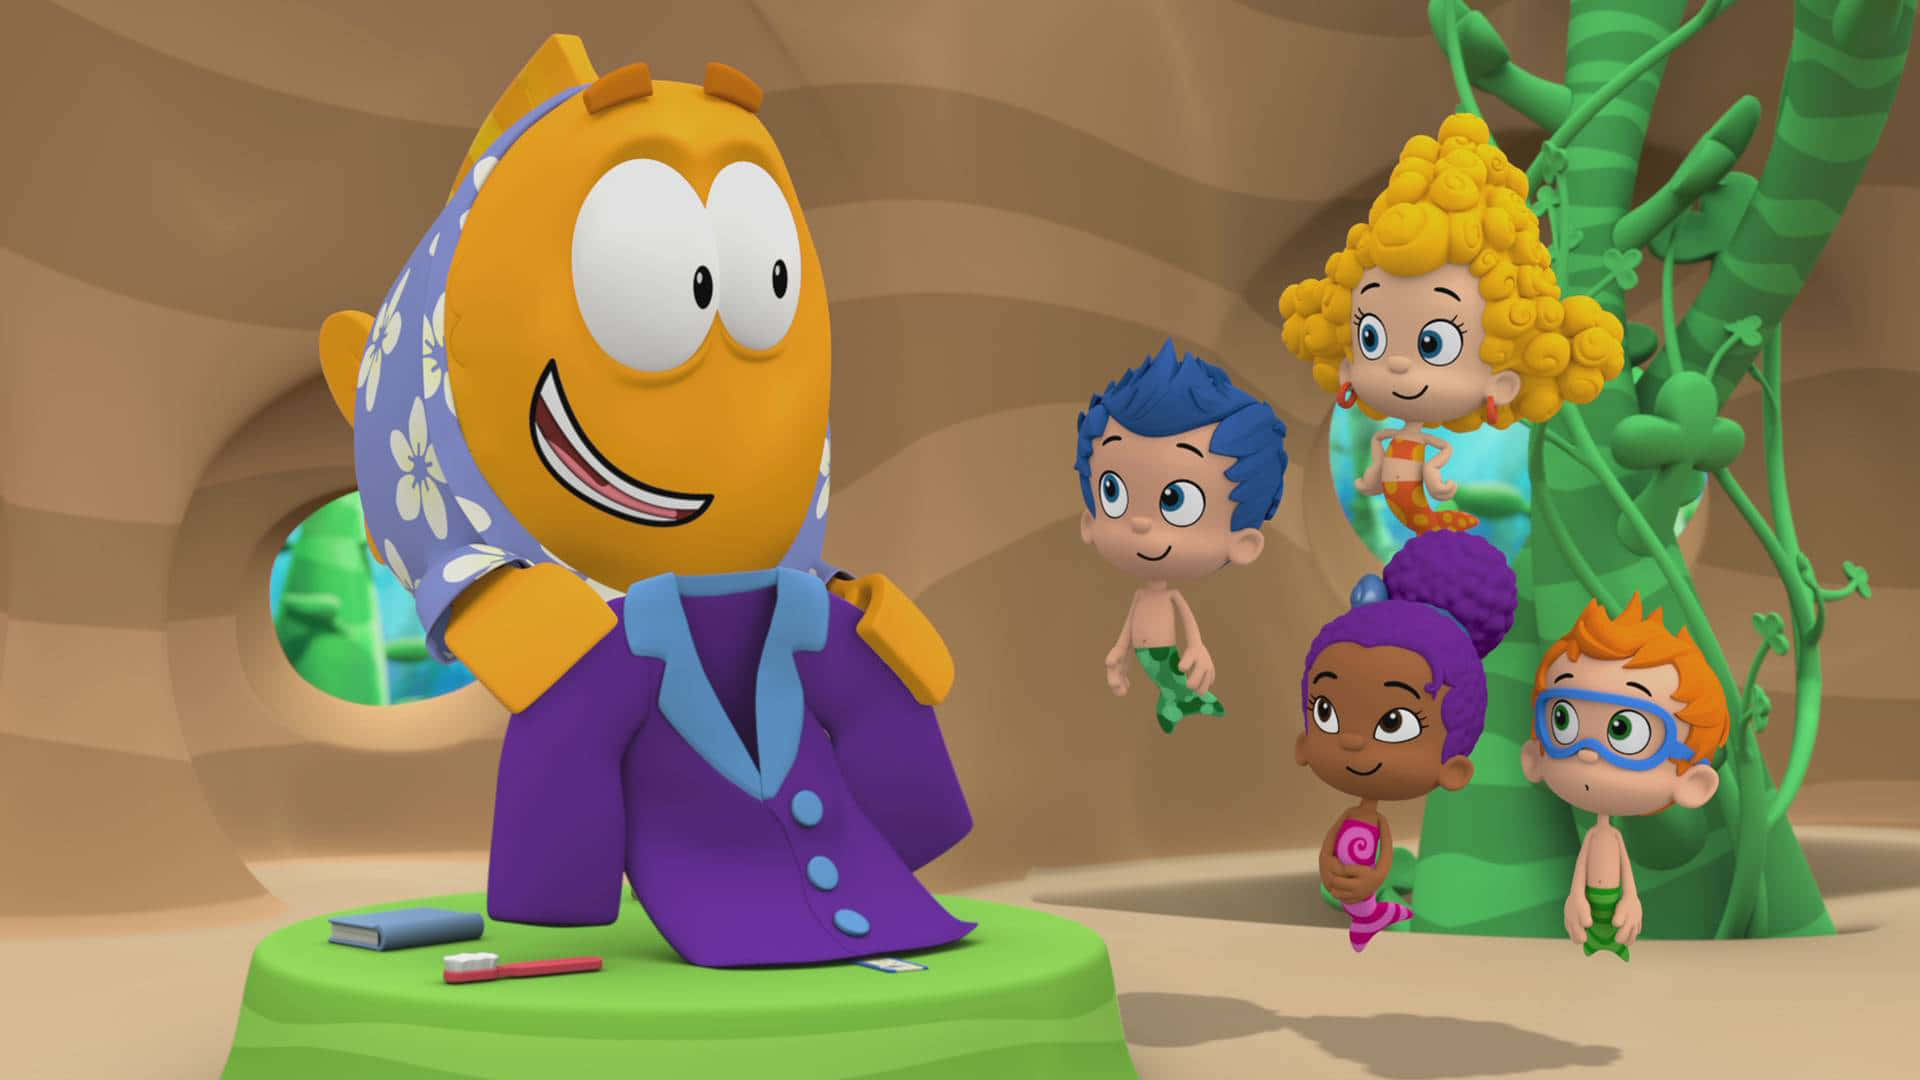 Ready for playful Adventure with Bubble Guppies